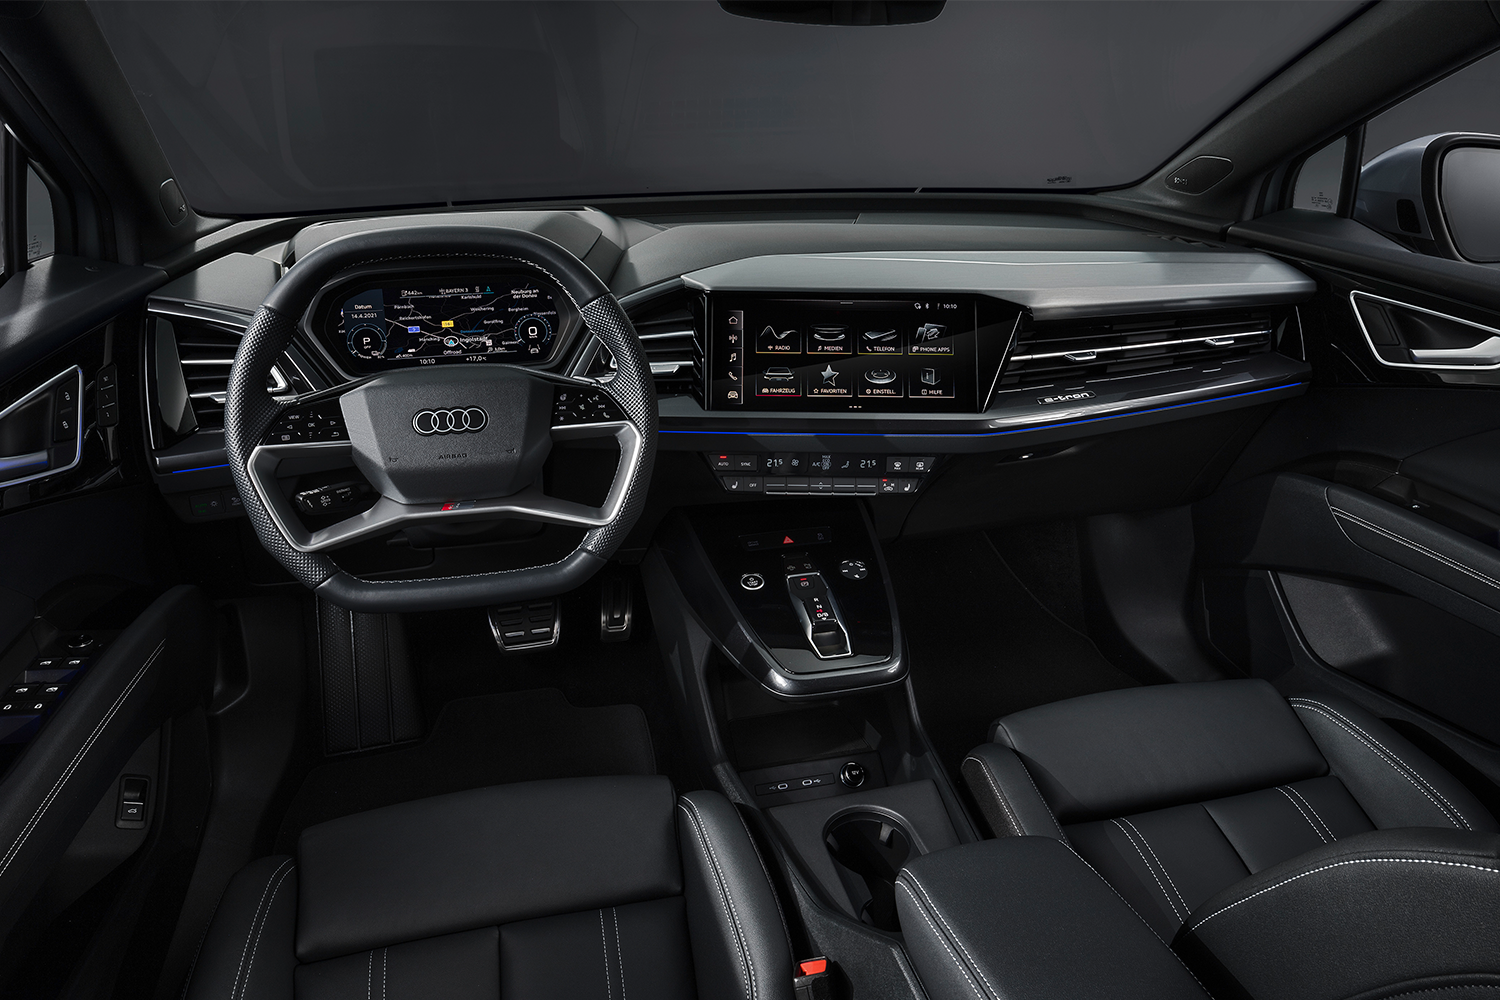 The interior of the Audi Q4 E-tron featuring a Sonos audio system